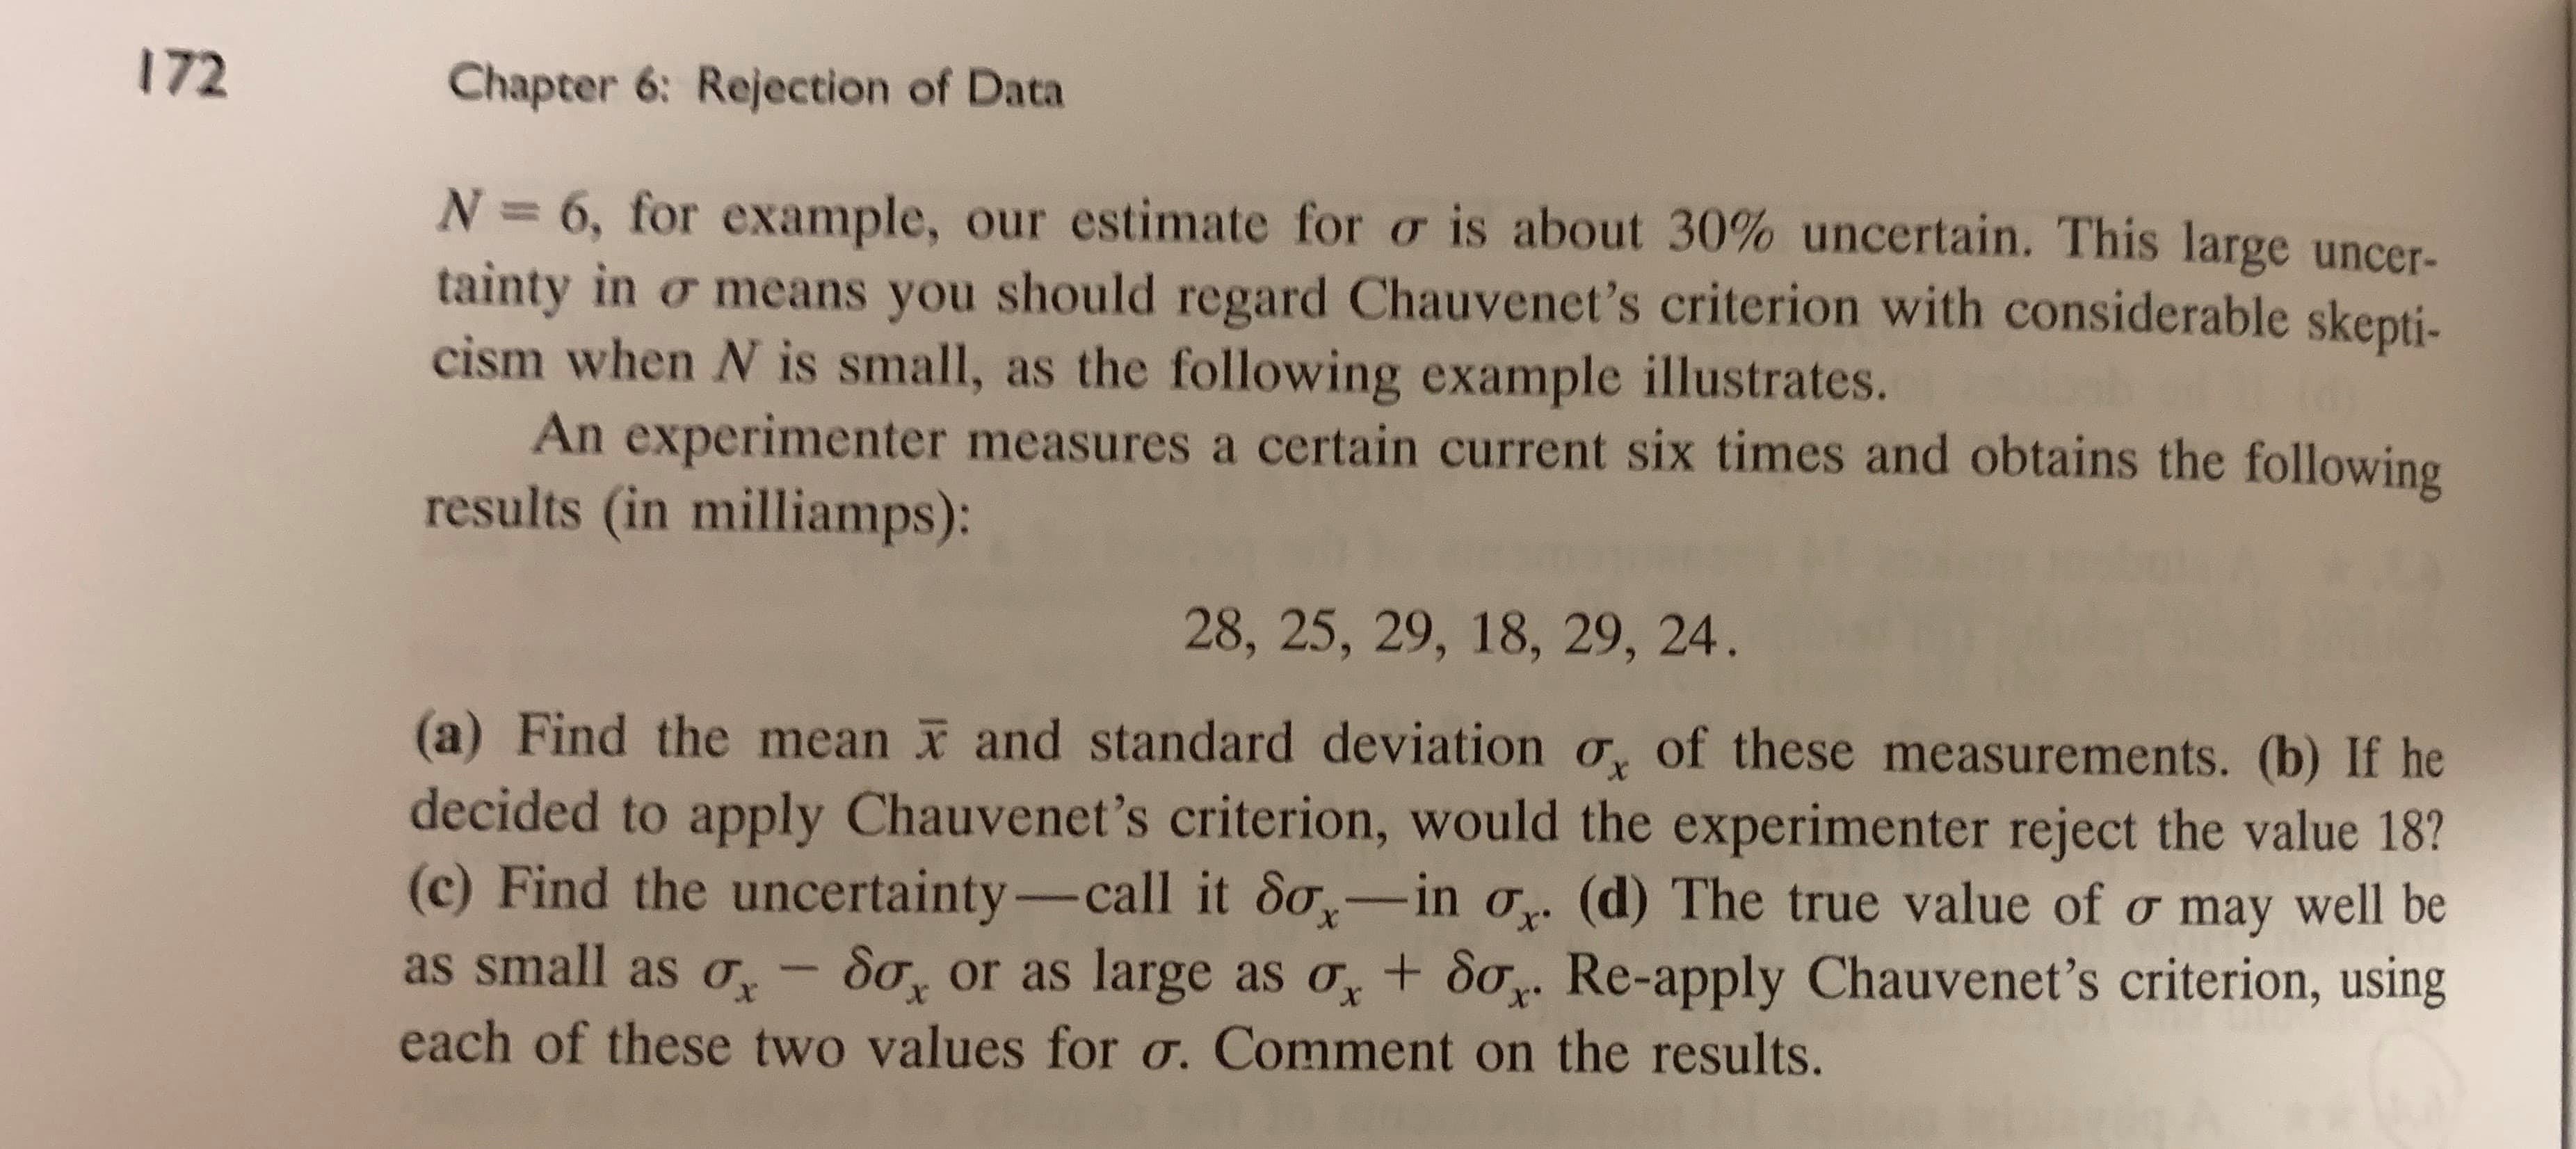 172
Chapter 6: Rejection of Data
N 6, for example, our estimate for o is about 30% uncertain. This large uncer-
tainty in or means you should regard Chauvenet's criterion with considerable skepti-
cism when N is small, as the following example illustrates.
An experimenter measures a certain current six times and obtains the following
results (in milliamps):
28, 25, 29, 18, 29, 24.
(a) Find the mean and standard deviation o of these measurements. (b) If he
decided to apply Chauvenet's criterion, would the experimenter reject the value 18?
(c) Find the uncertainty- call it So-in o (d) The true value of o may well be
as small as o
X
So or as large as oy + 8oy Re-apply Chauvenet's criterion, using
X
X
each of these two values for o. Comment on the results.
